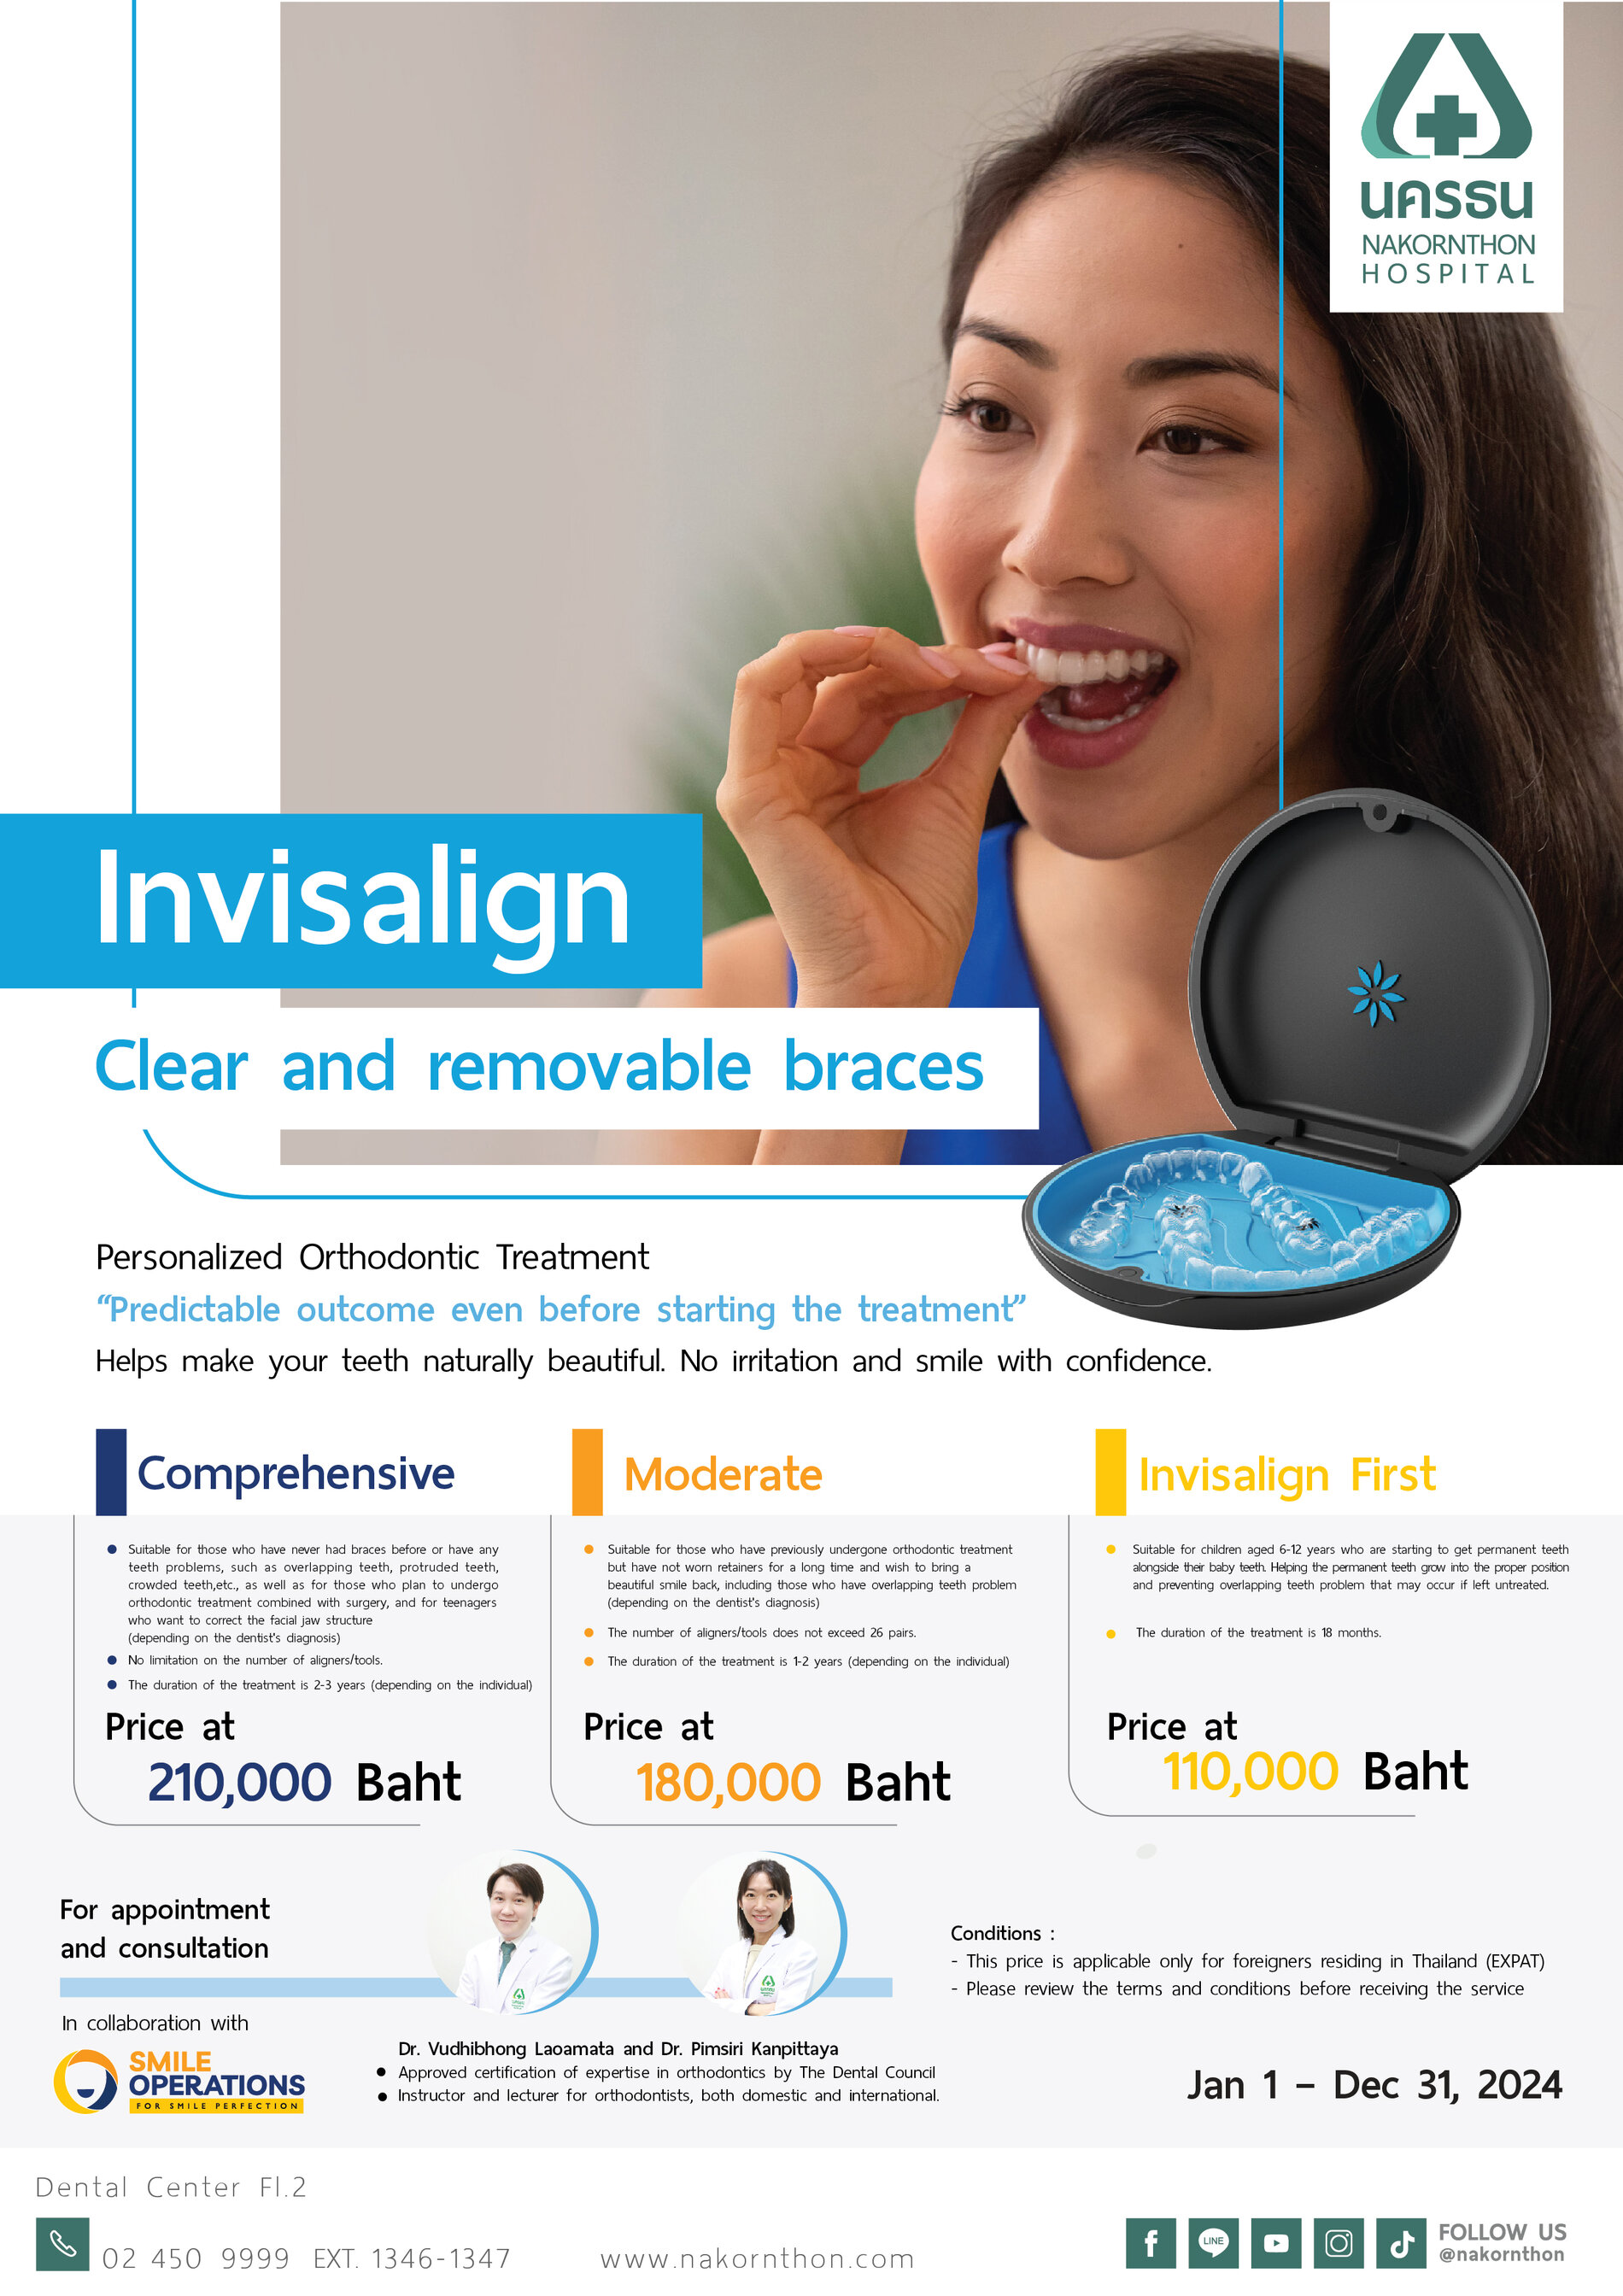 Invisalign - Clear and removable braces